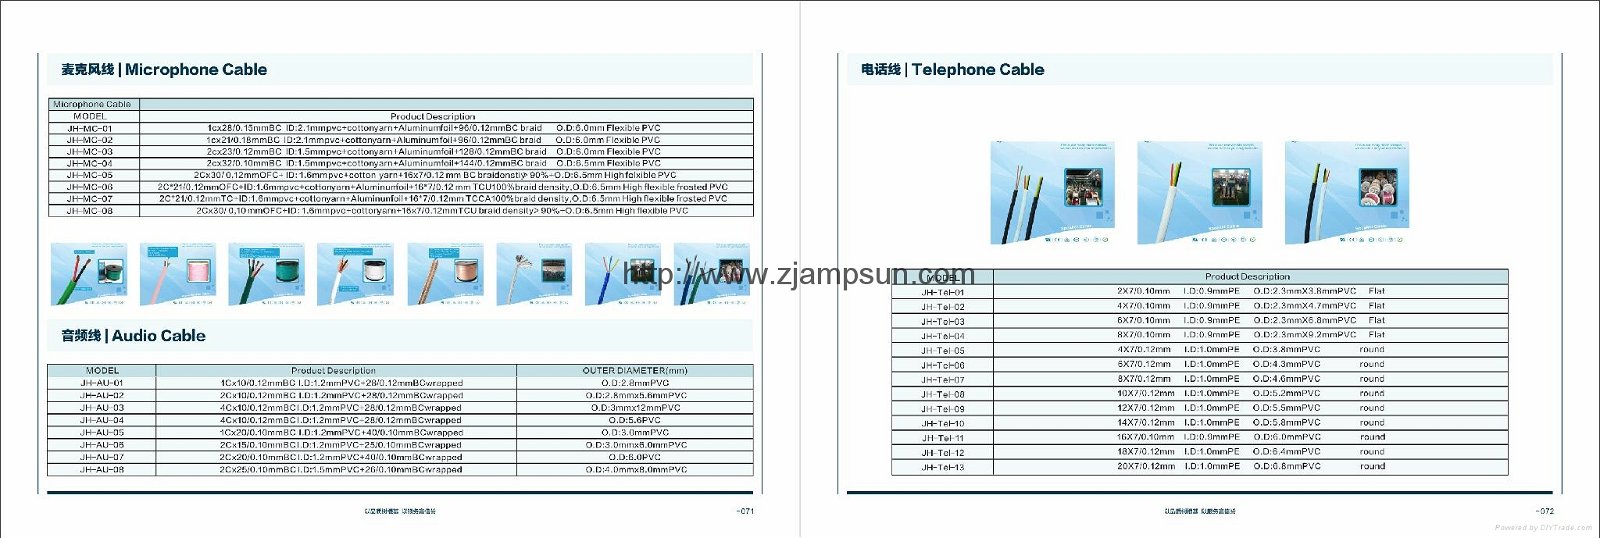 microphone cable,telephone cable.. 1